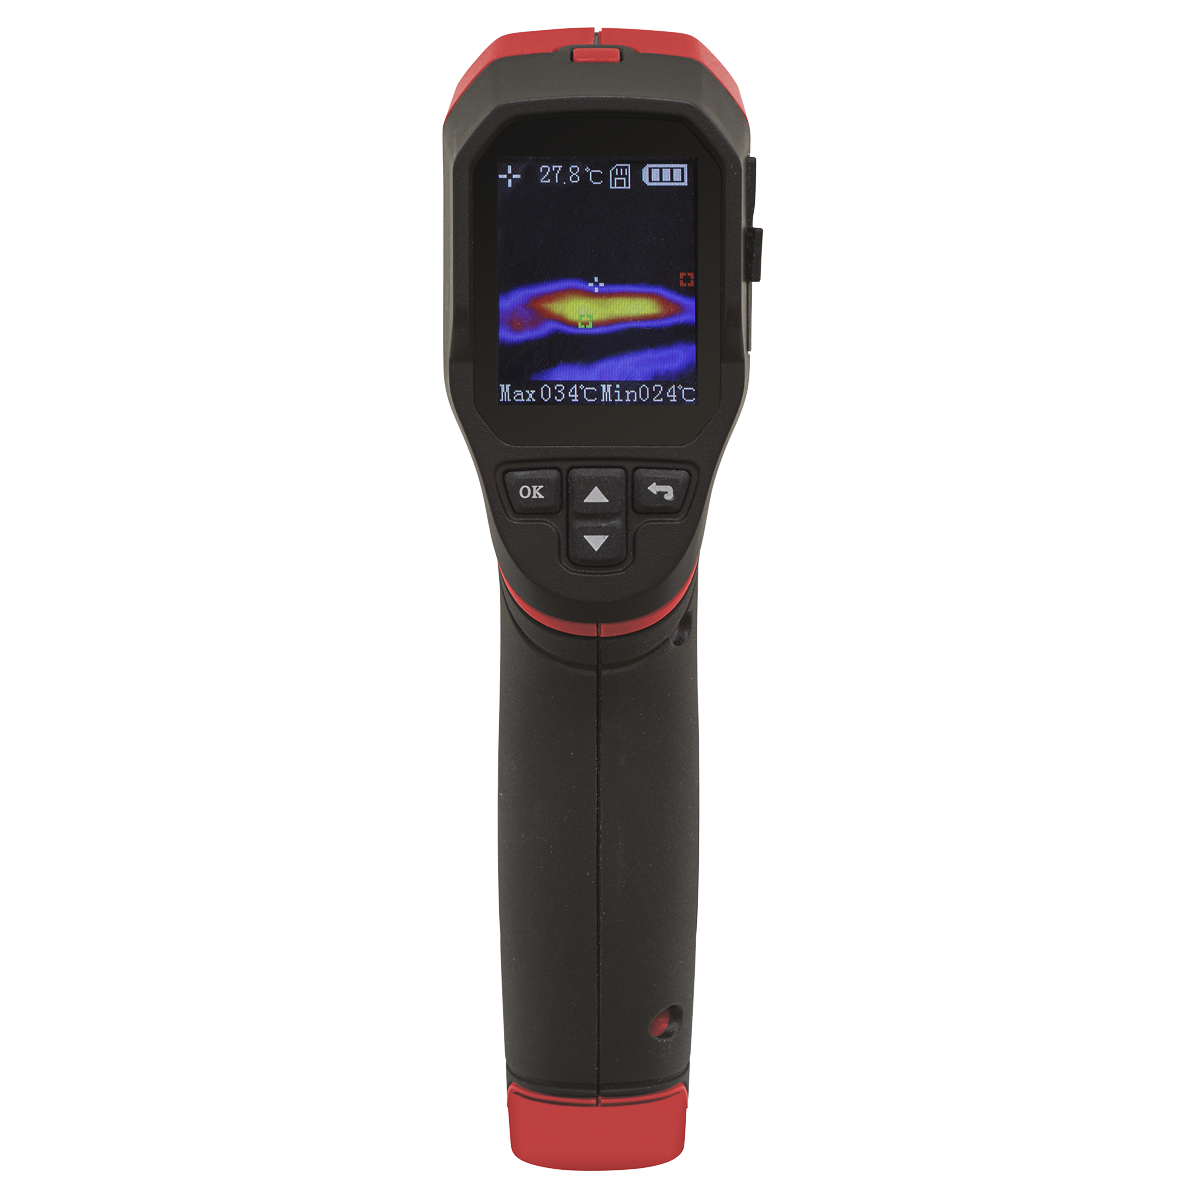 Thermal imaging camera for the detection of high and low temperature